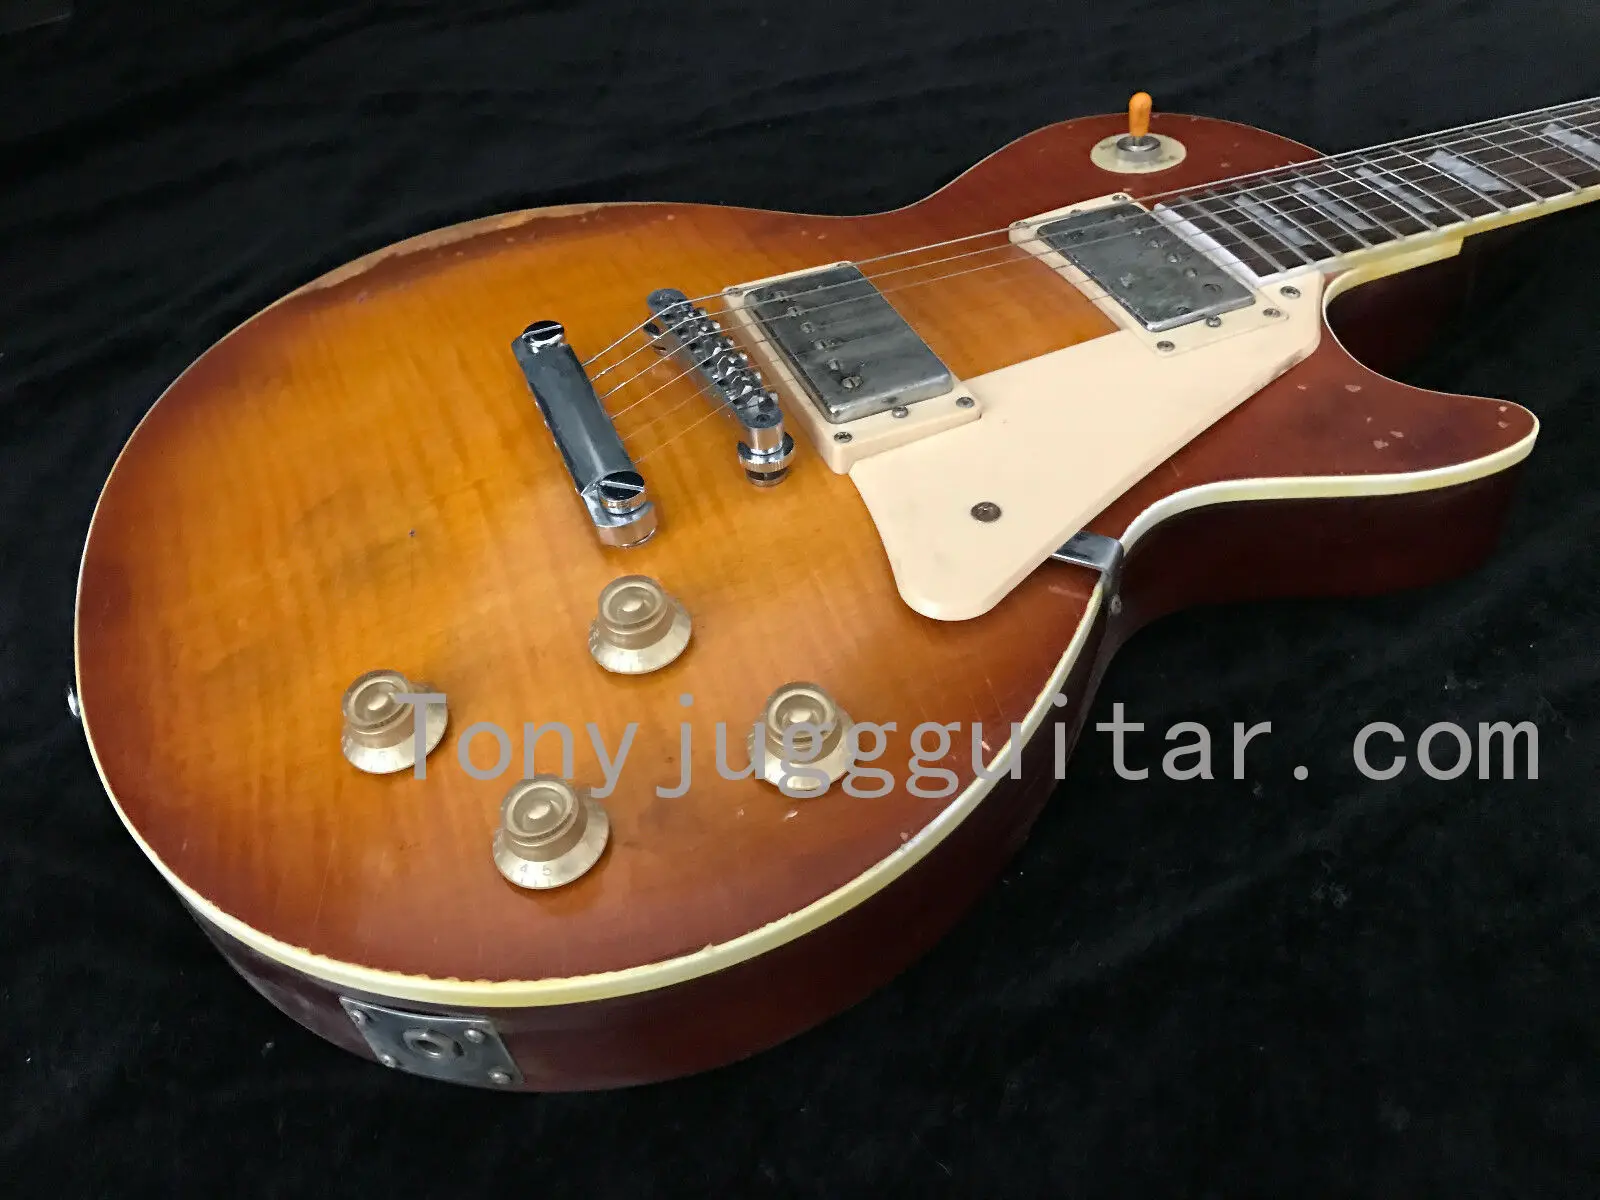 

1959 Relic Nitrolacquer VOS Amber Burst Flame Maple Top Electric Guitar One Piece Mahogany Body and Neck (No Scarf Joint),